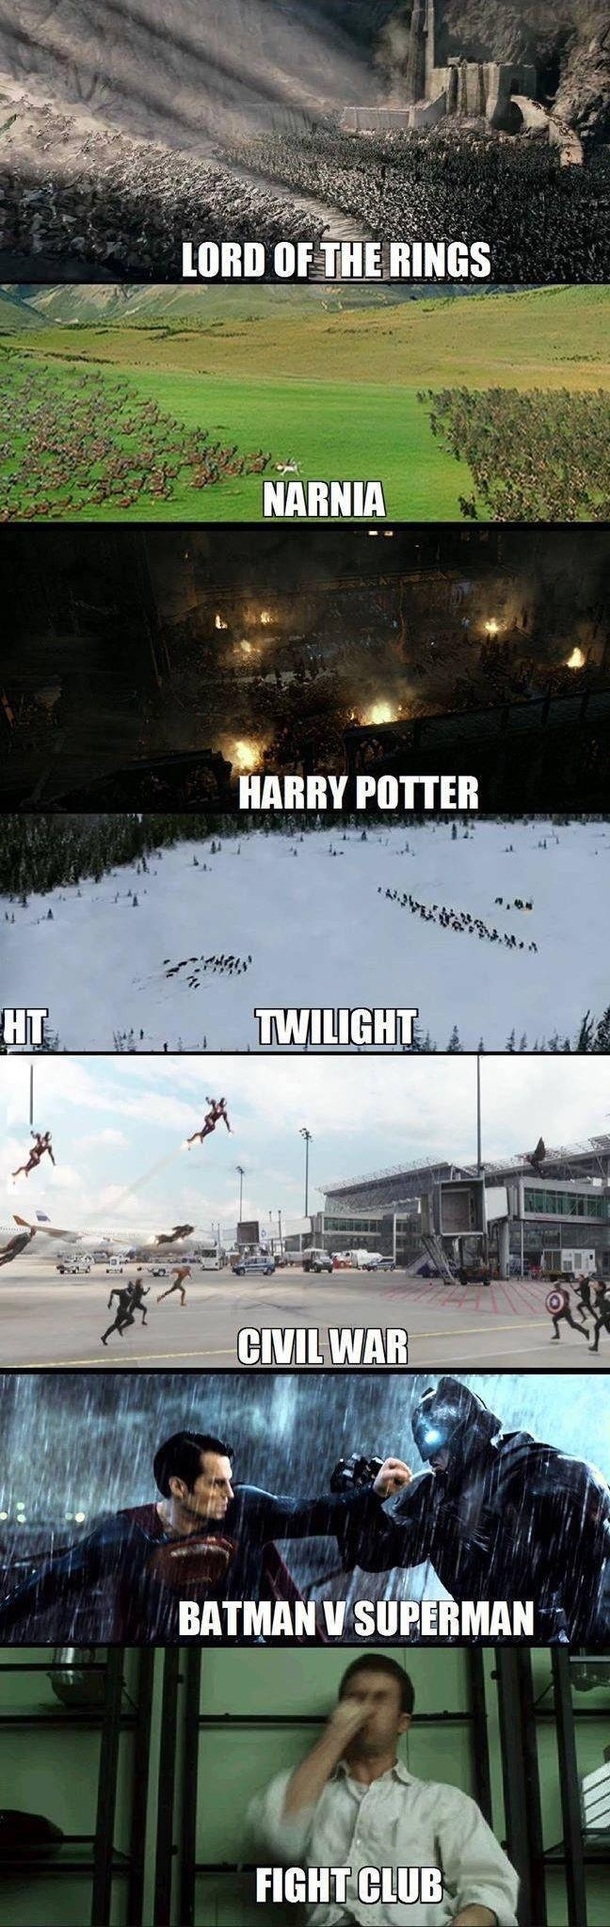 Epic battles in movies